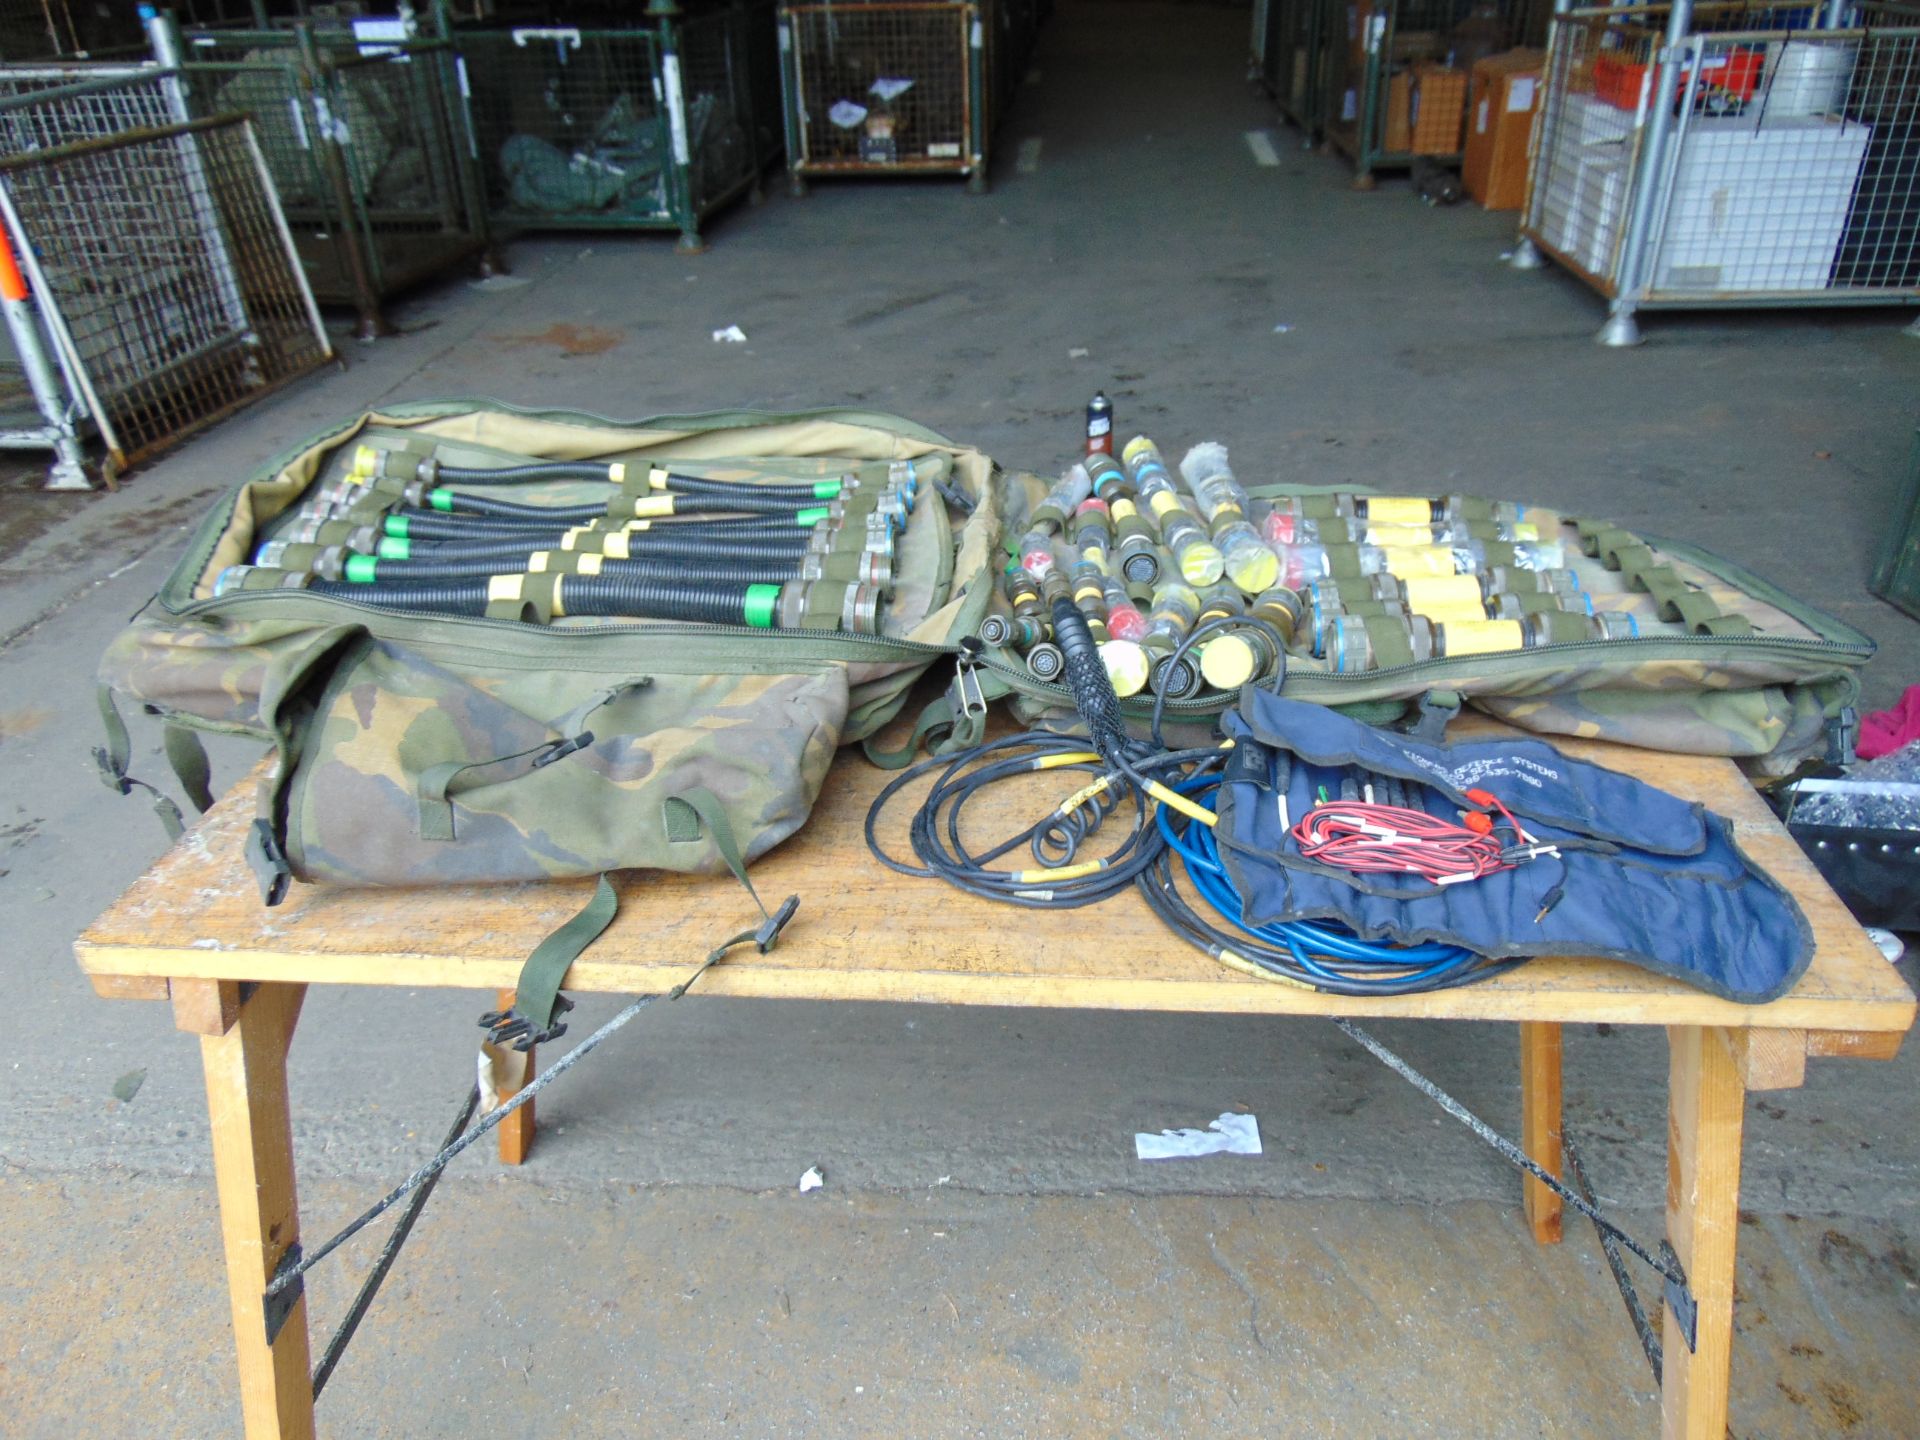 British Army Tactical Field Rucksac c/w Coms Equipment - Image 9 of 13